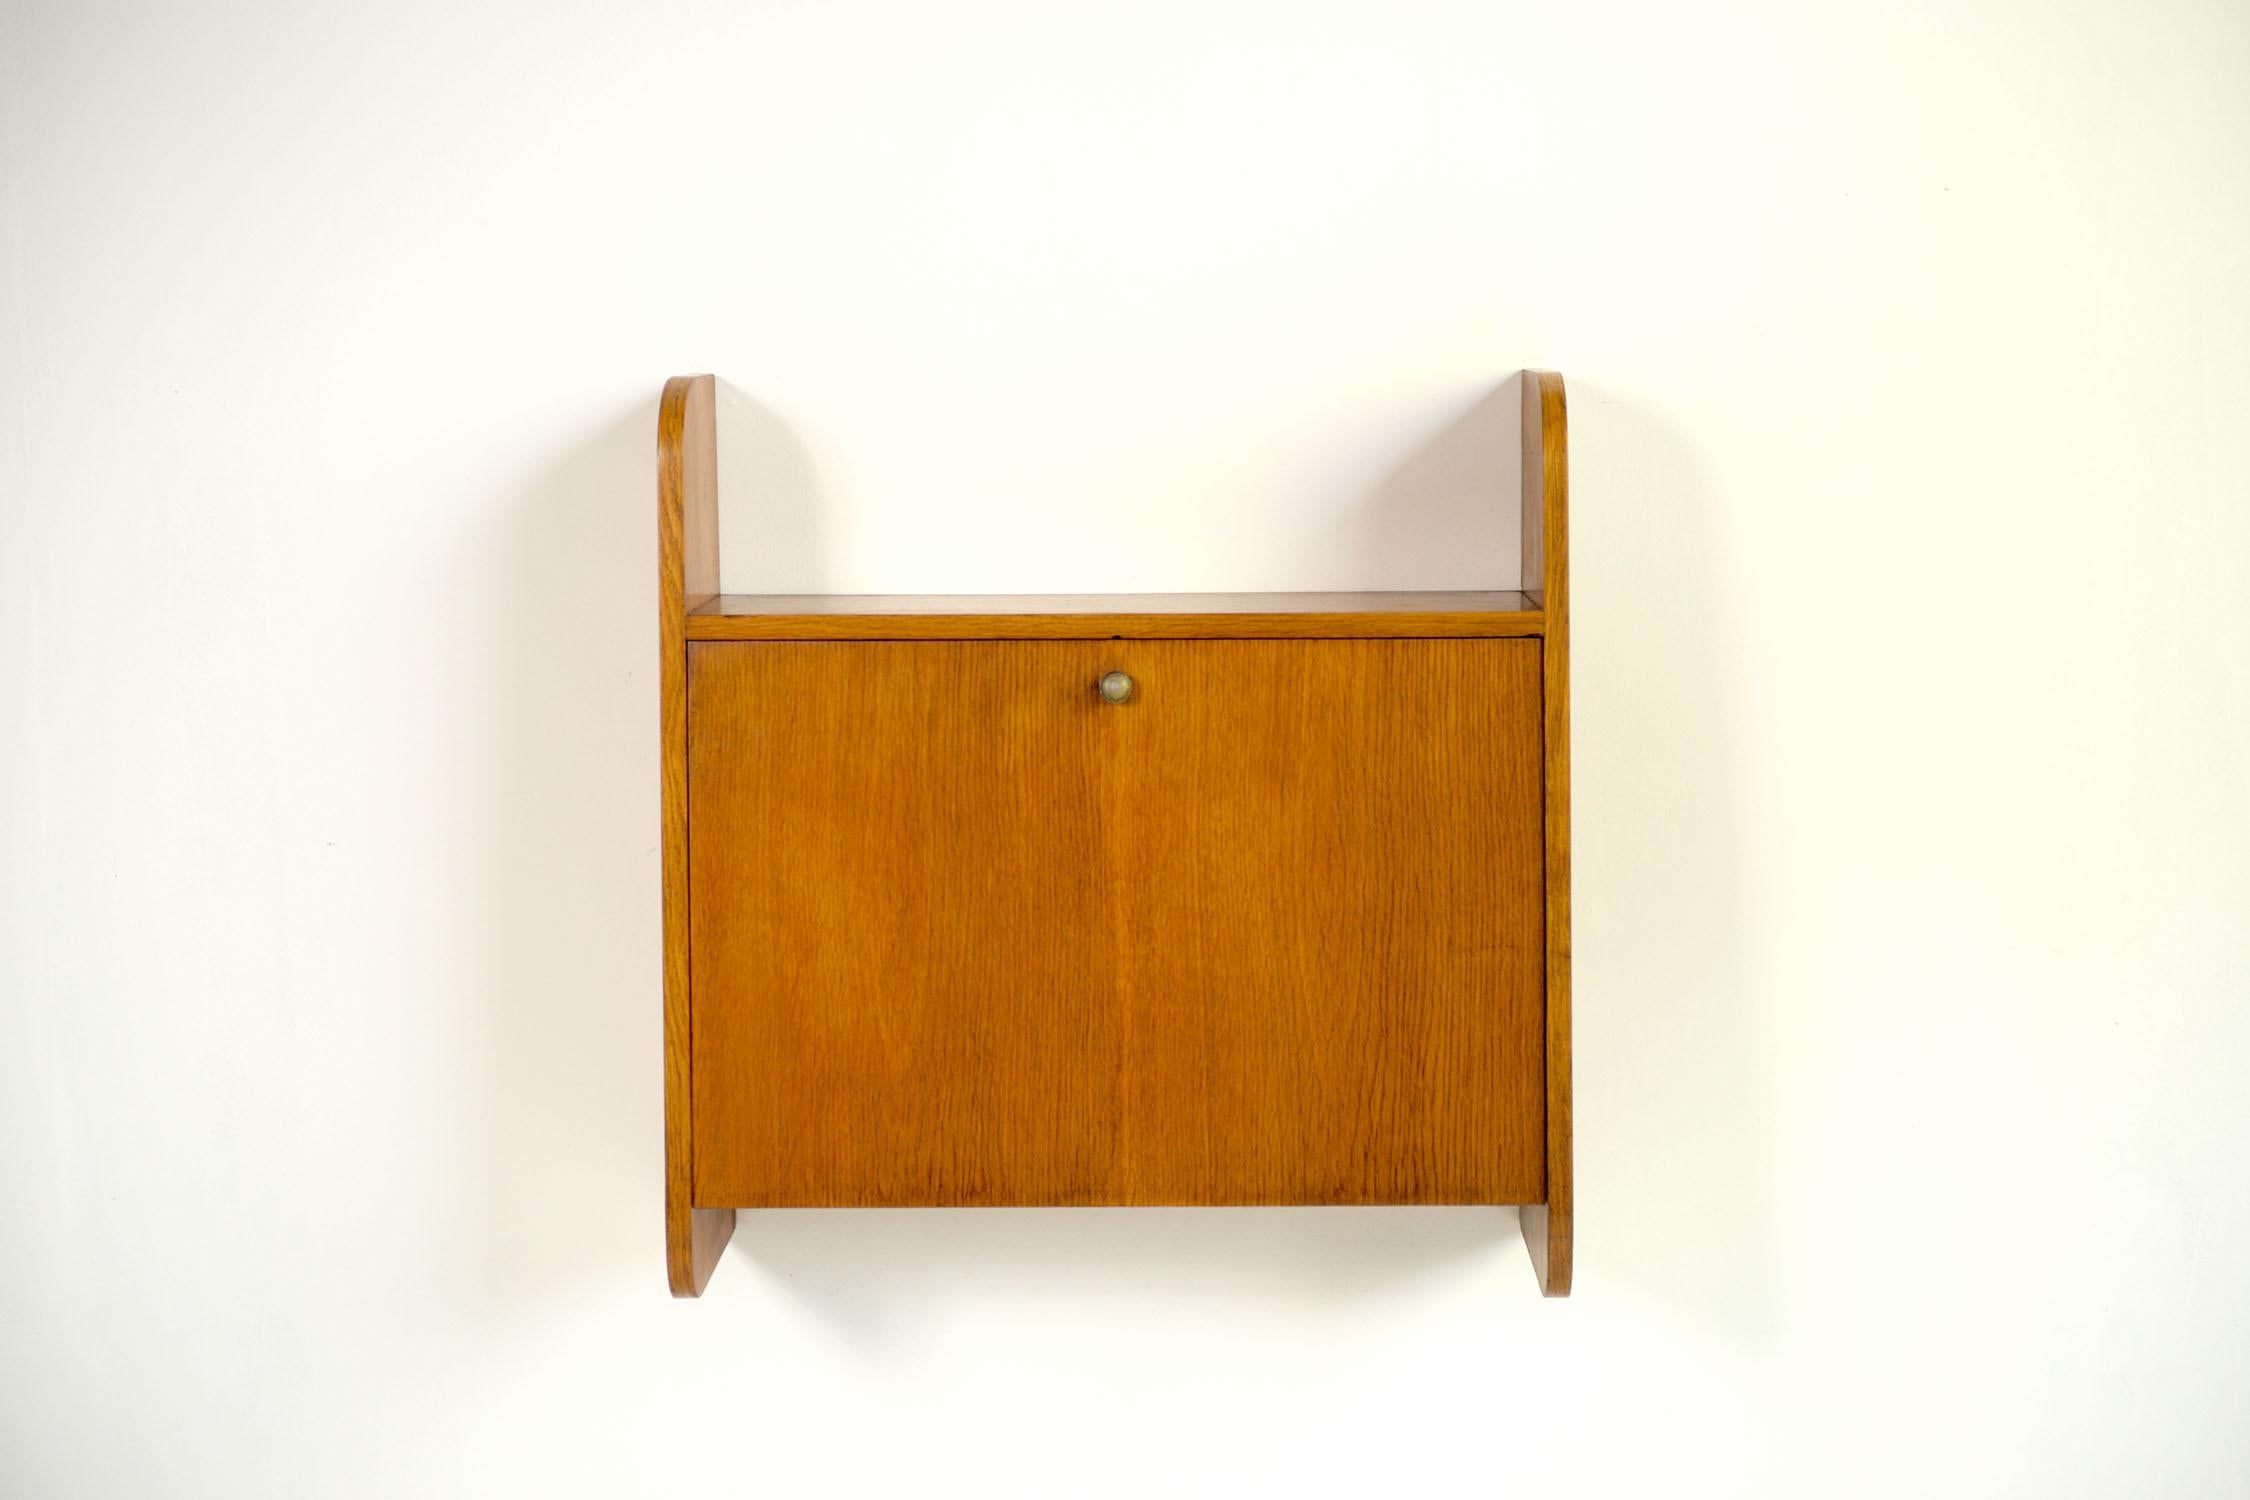 Wall secretary in slatted plywood, blond oak veneer, French reconstruction 1950. The large flap opens to form a writing desk (depth 64 cm). Inside, a molded shelf and a small drawer. With its dimensions and layout, this pretty wall-mounted desk is